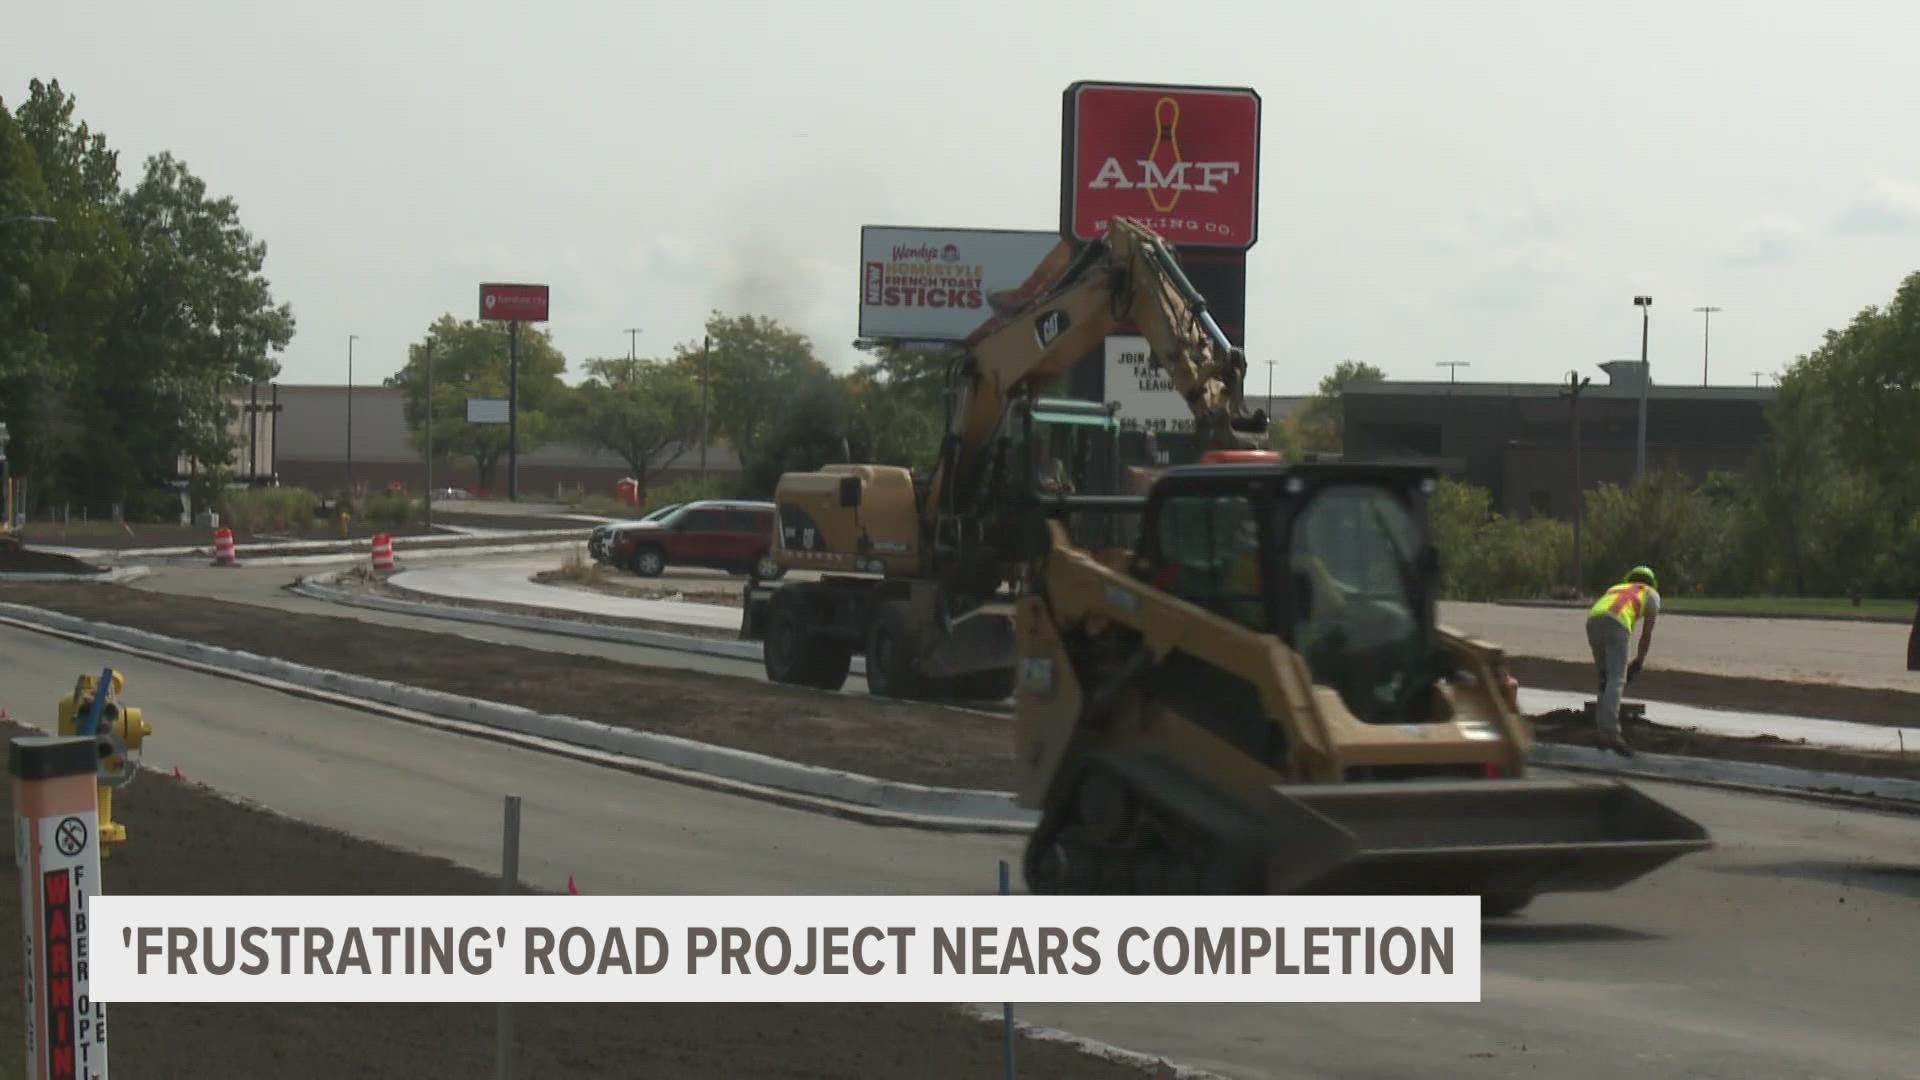 The work to fully reconstruct the road near Centerpoint Mall in Grand Rapids is expected to open to traffic on Sept. 27.